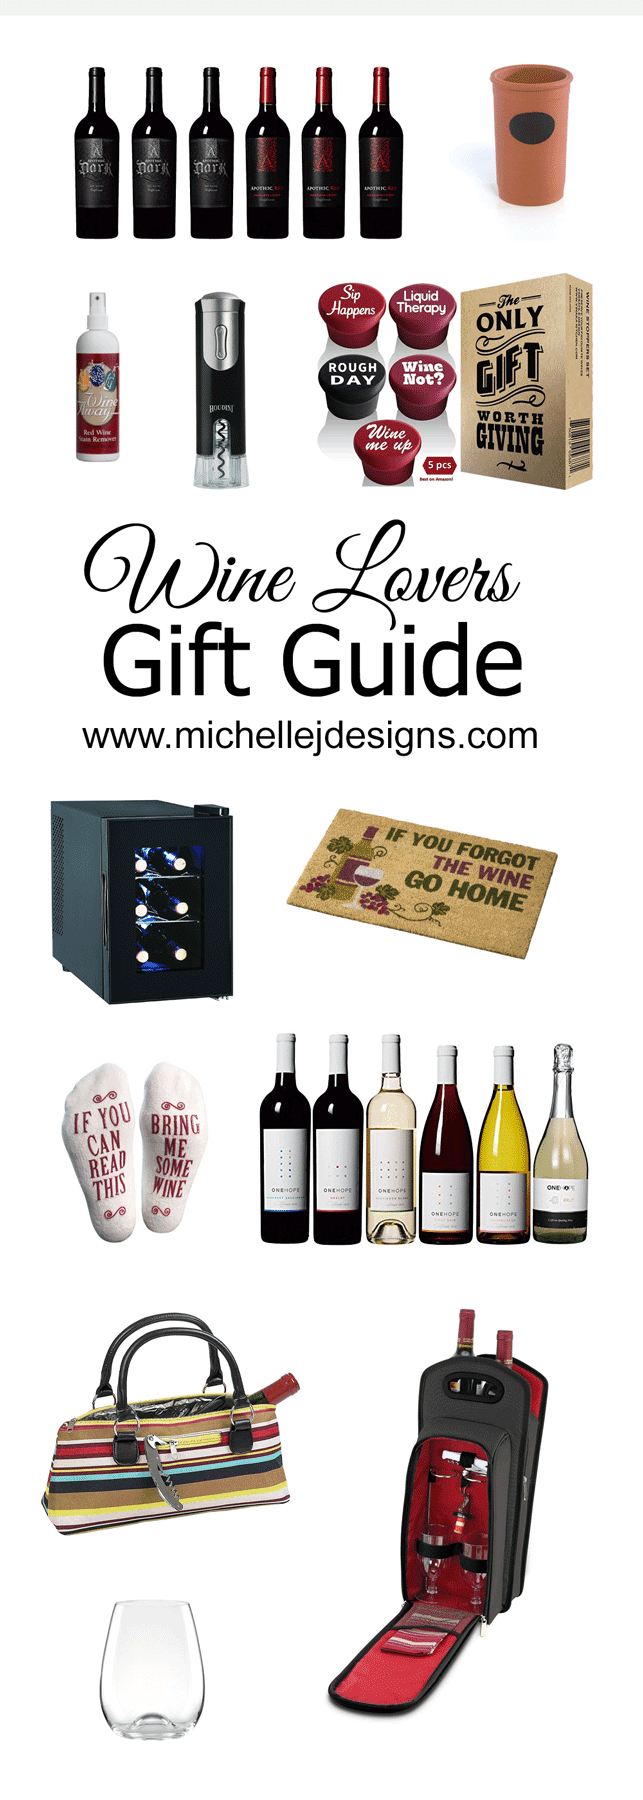 Are you wine lover? I bet if you aren't one of your best friends or family member is. That is why I created the Wine Lovers Gift Guide. It has a variety of products and prices for any occasion. www.michellejdesigns.com